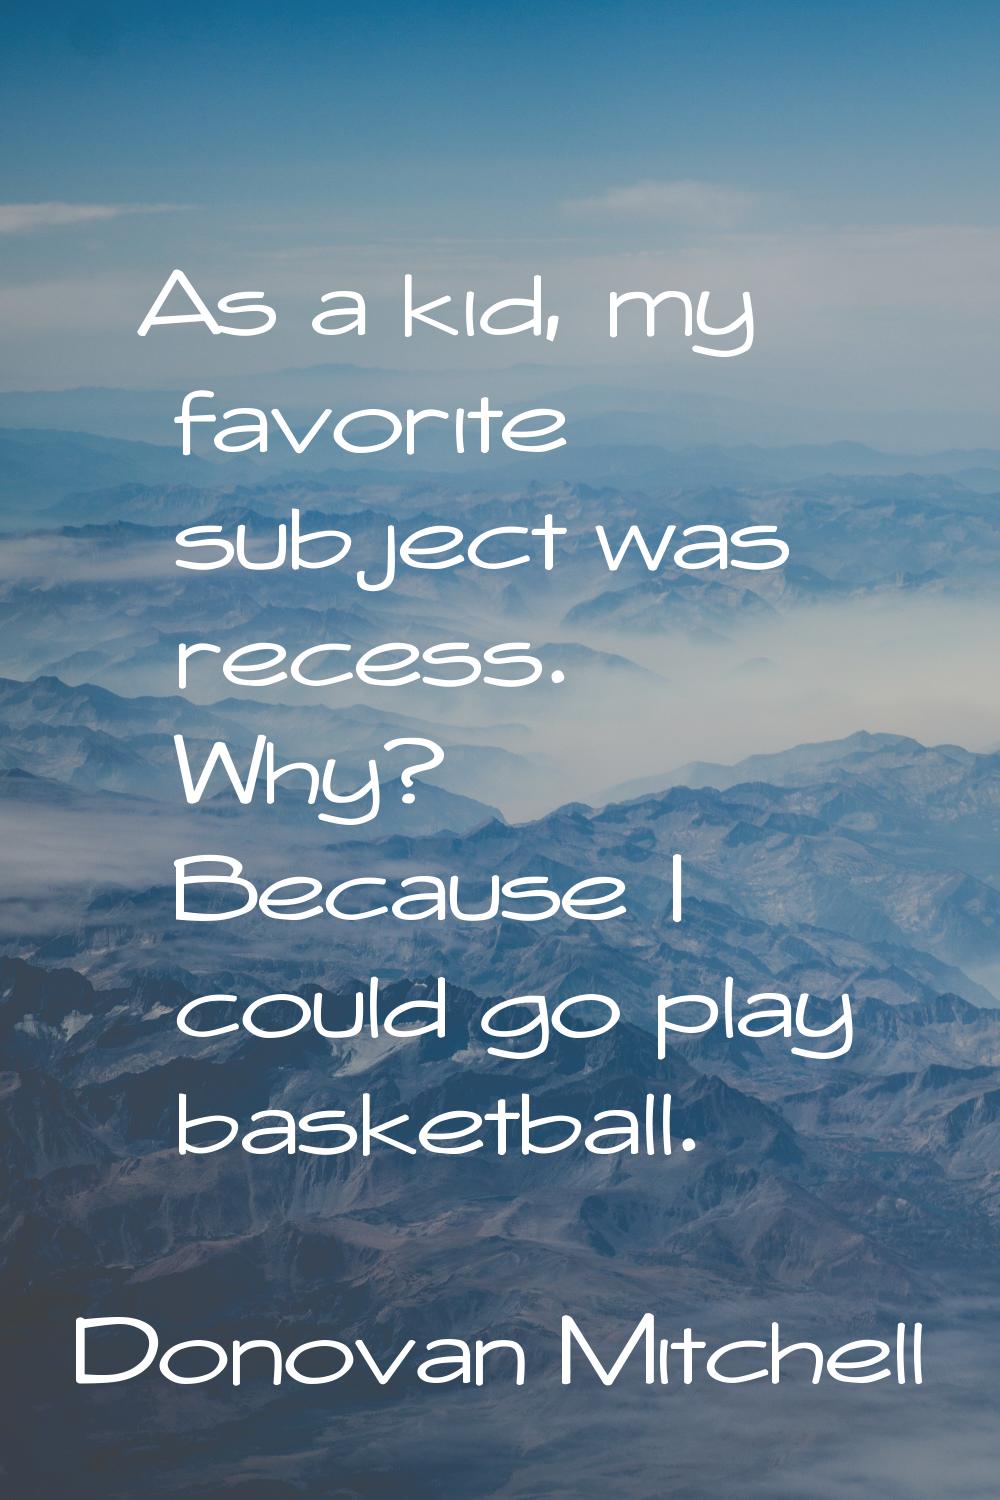 As a kid, my favorite subject was recess. Why? Because I could go play basketball.